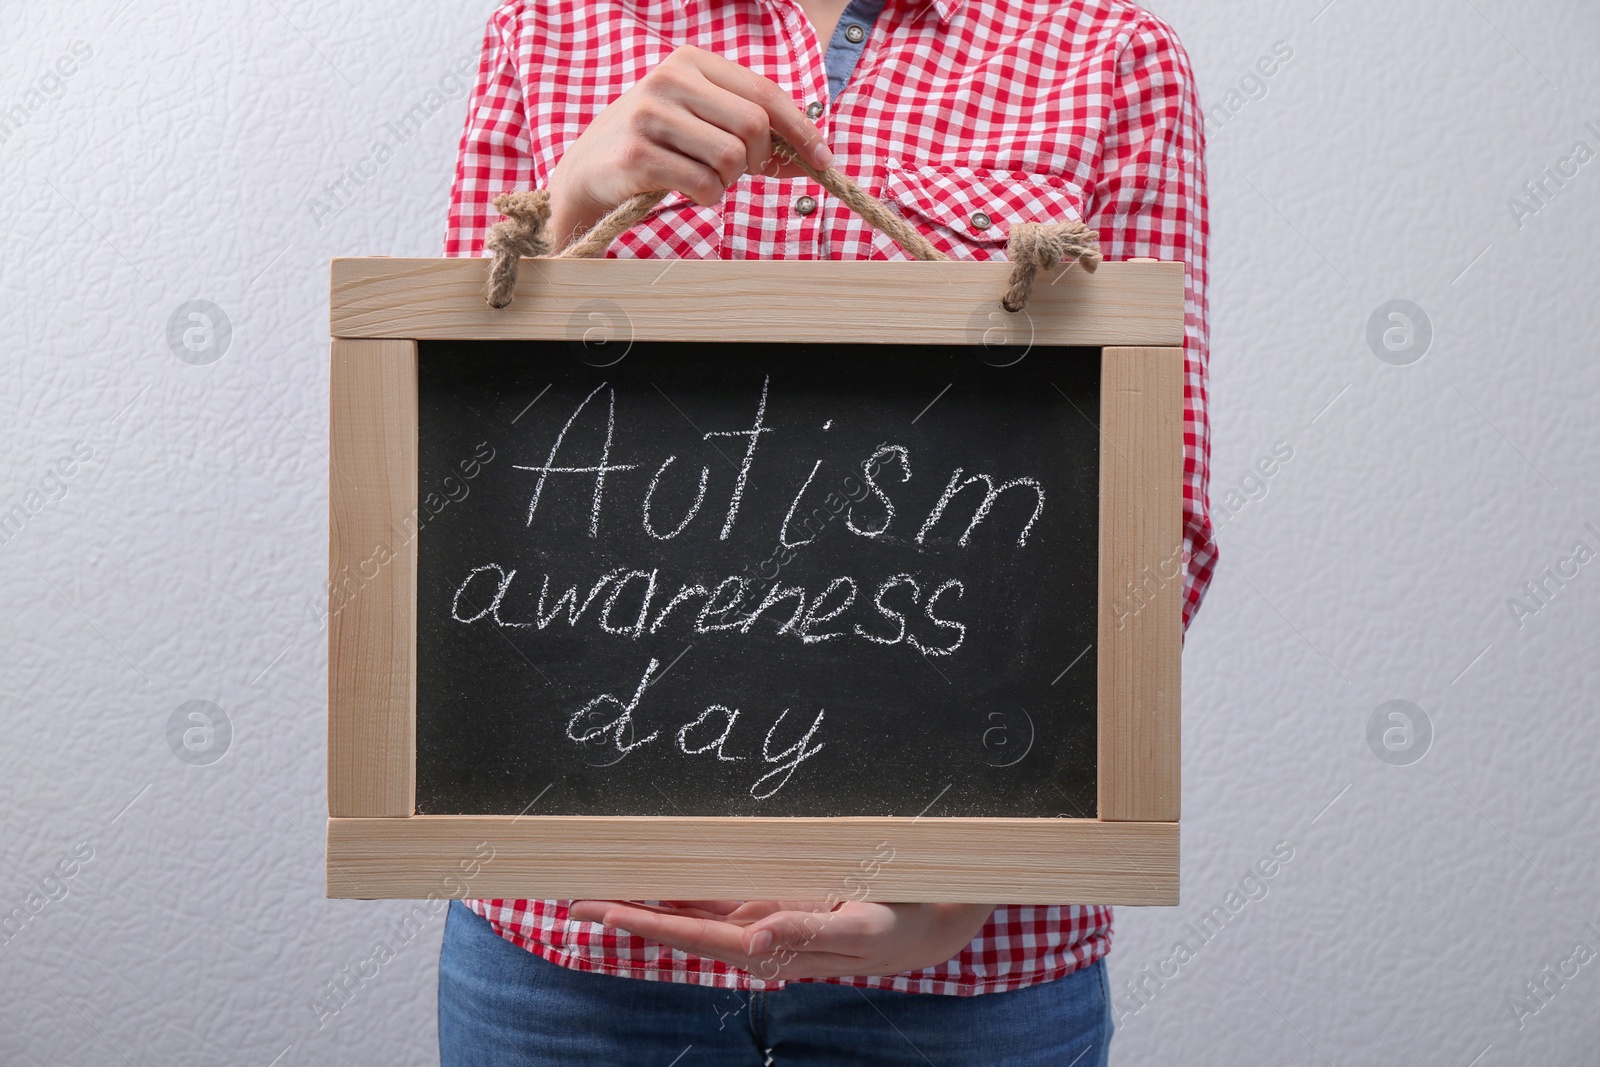 Photo of Woman holding blackboard with phrase "Autism awareness day" on light background